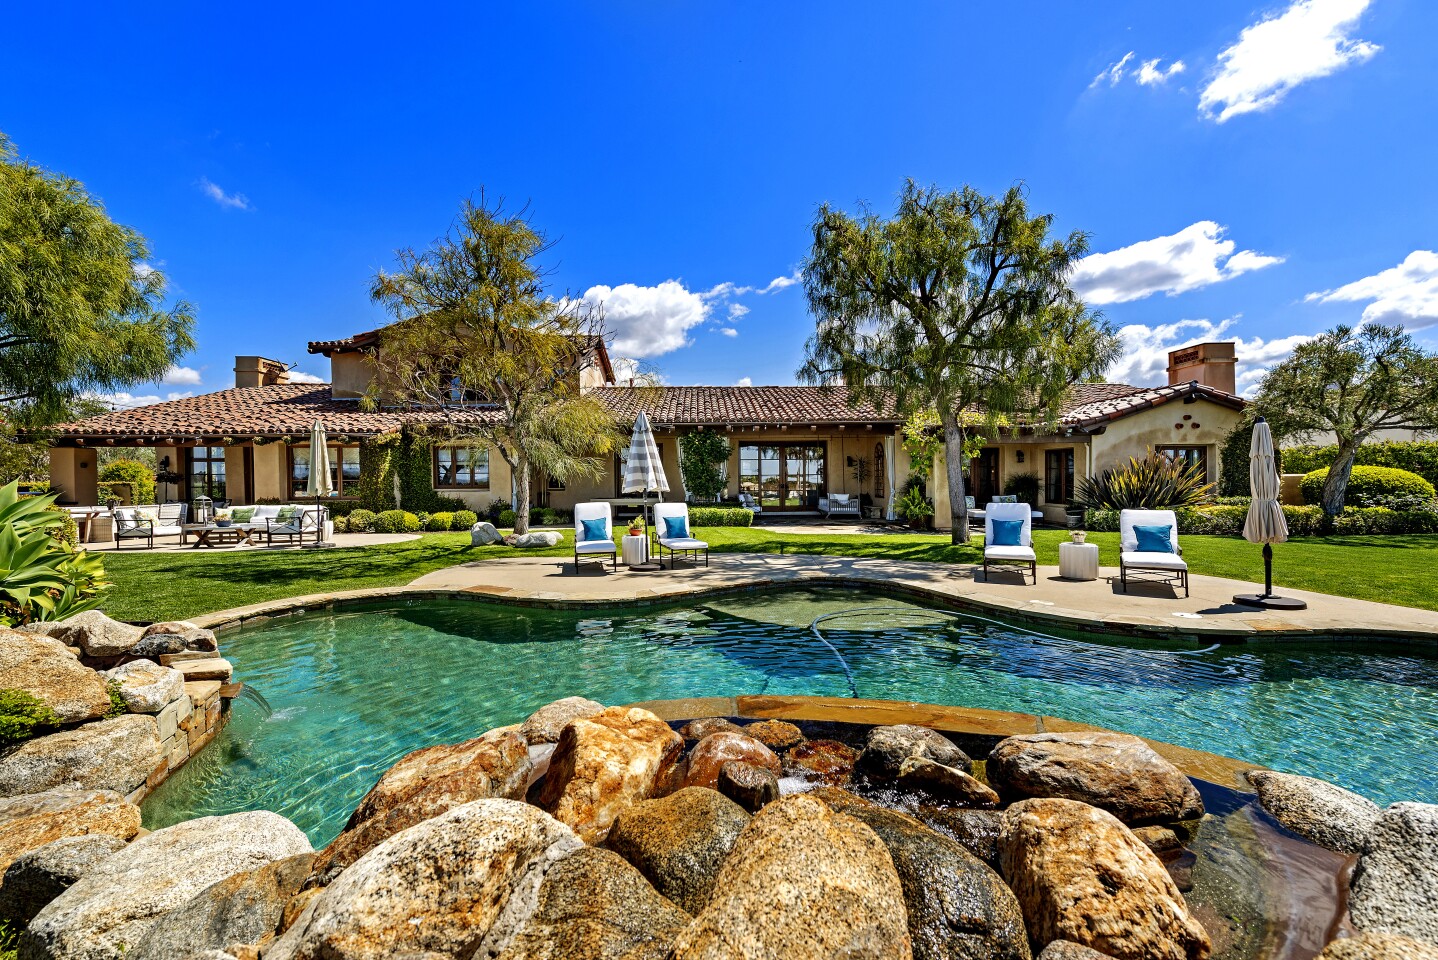 Former Chargers quarterback Philip Rivers is seeking $4.199 million for his Spanish-style estate in the Santaluz community of San Diego. The one-acre property sits behind gates and features a putting green, a resort-style swimming pool, lawn and golf course views. Built in 2005 and since updated, the single-story house has more than 6,800 square feet of living space with six bedrooms and 6.5 bathrooms.